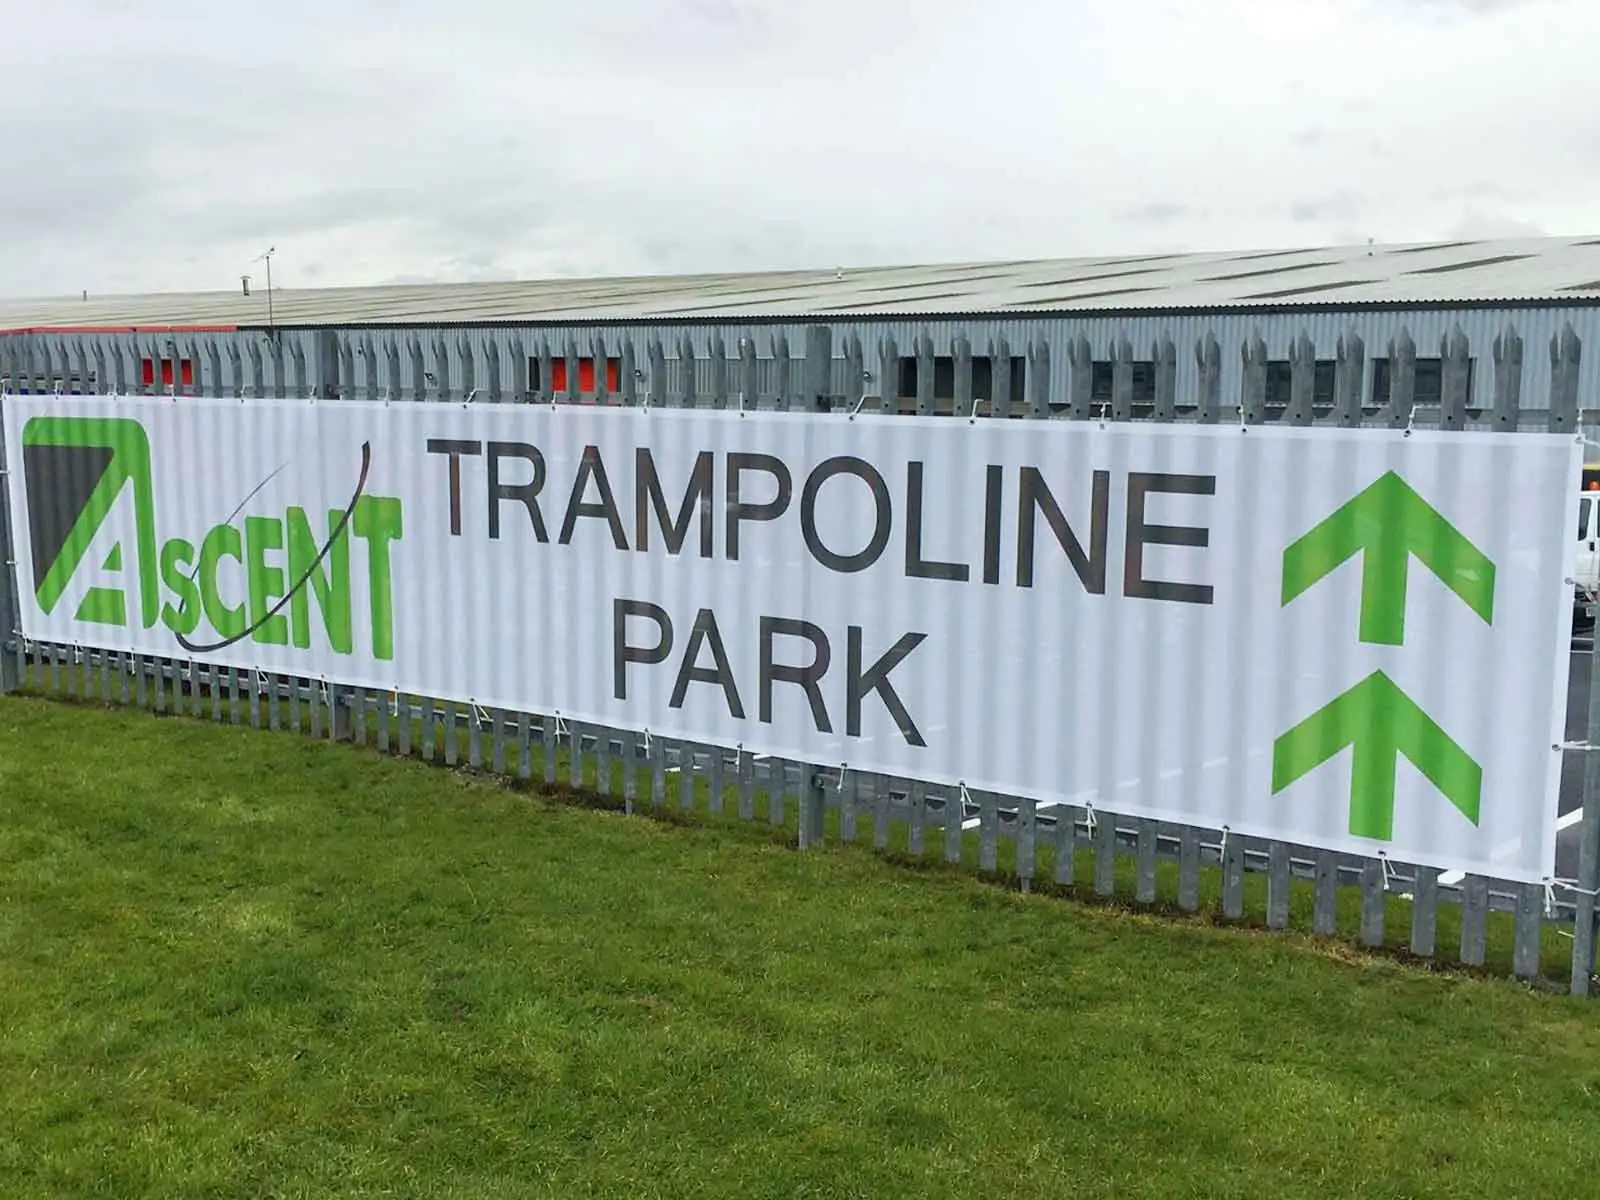 Trampoline Park Outdoor Banner Signs in Chicago, IL